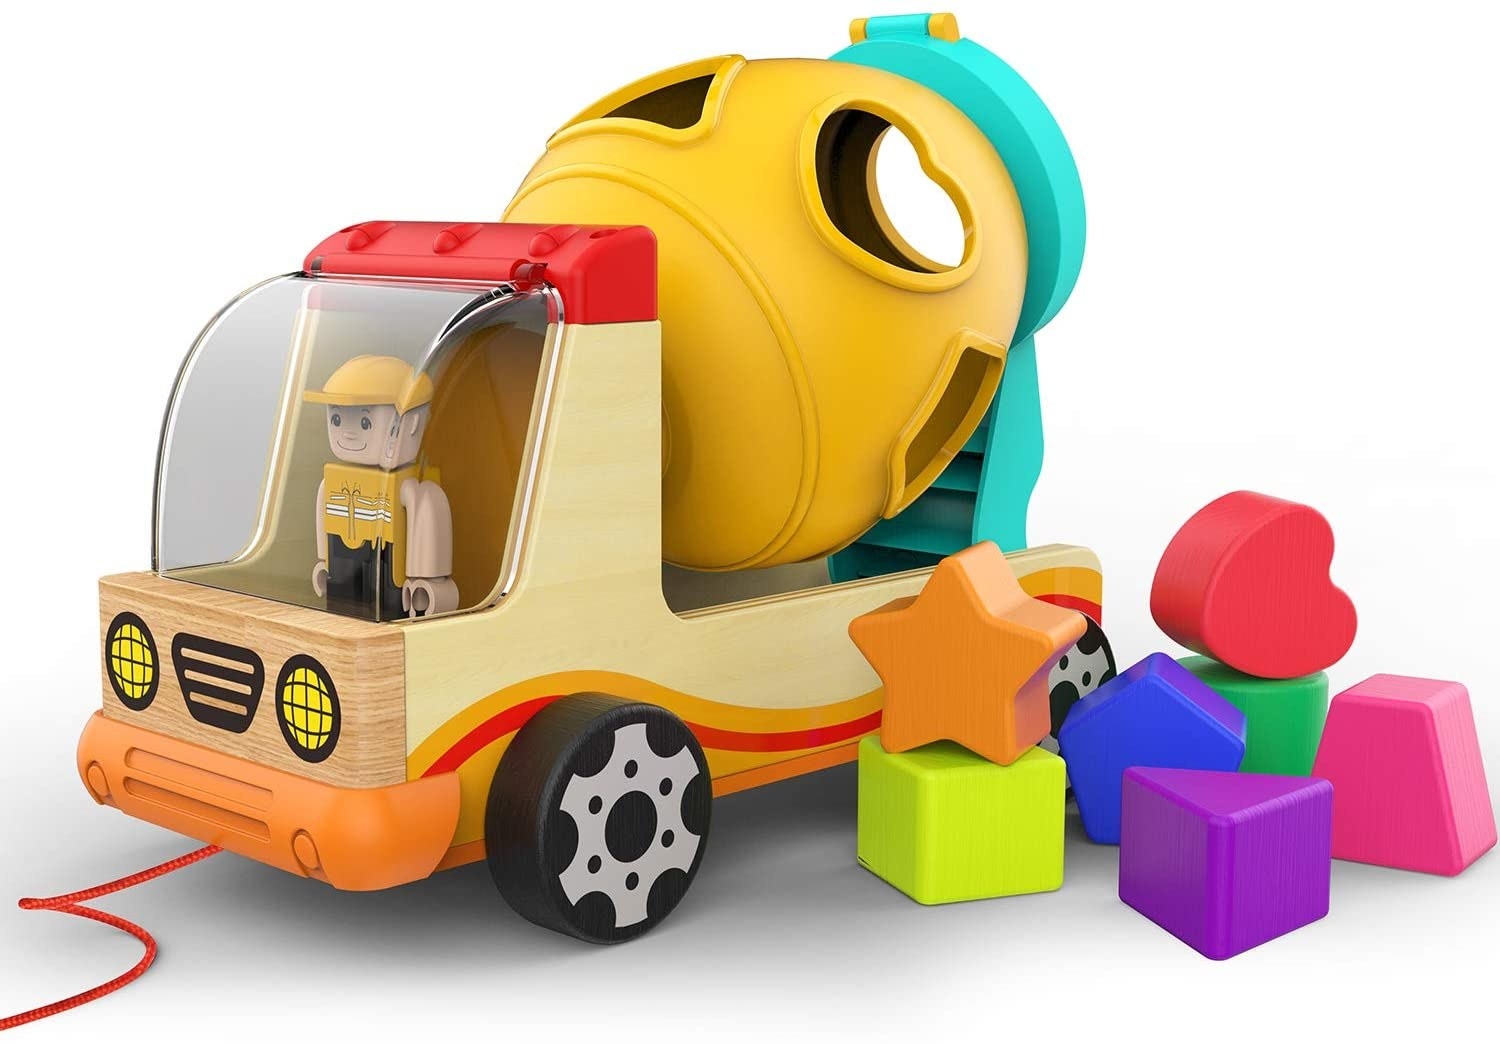 The wooden truck with a toy figure and plastic cement mixture and six colorful wooden shapes